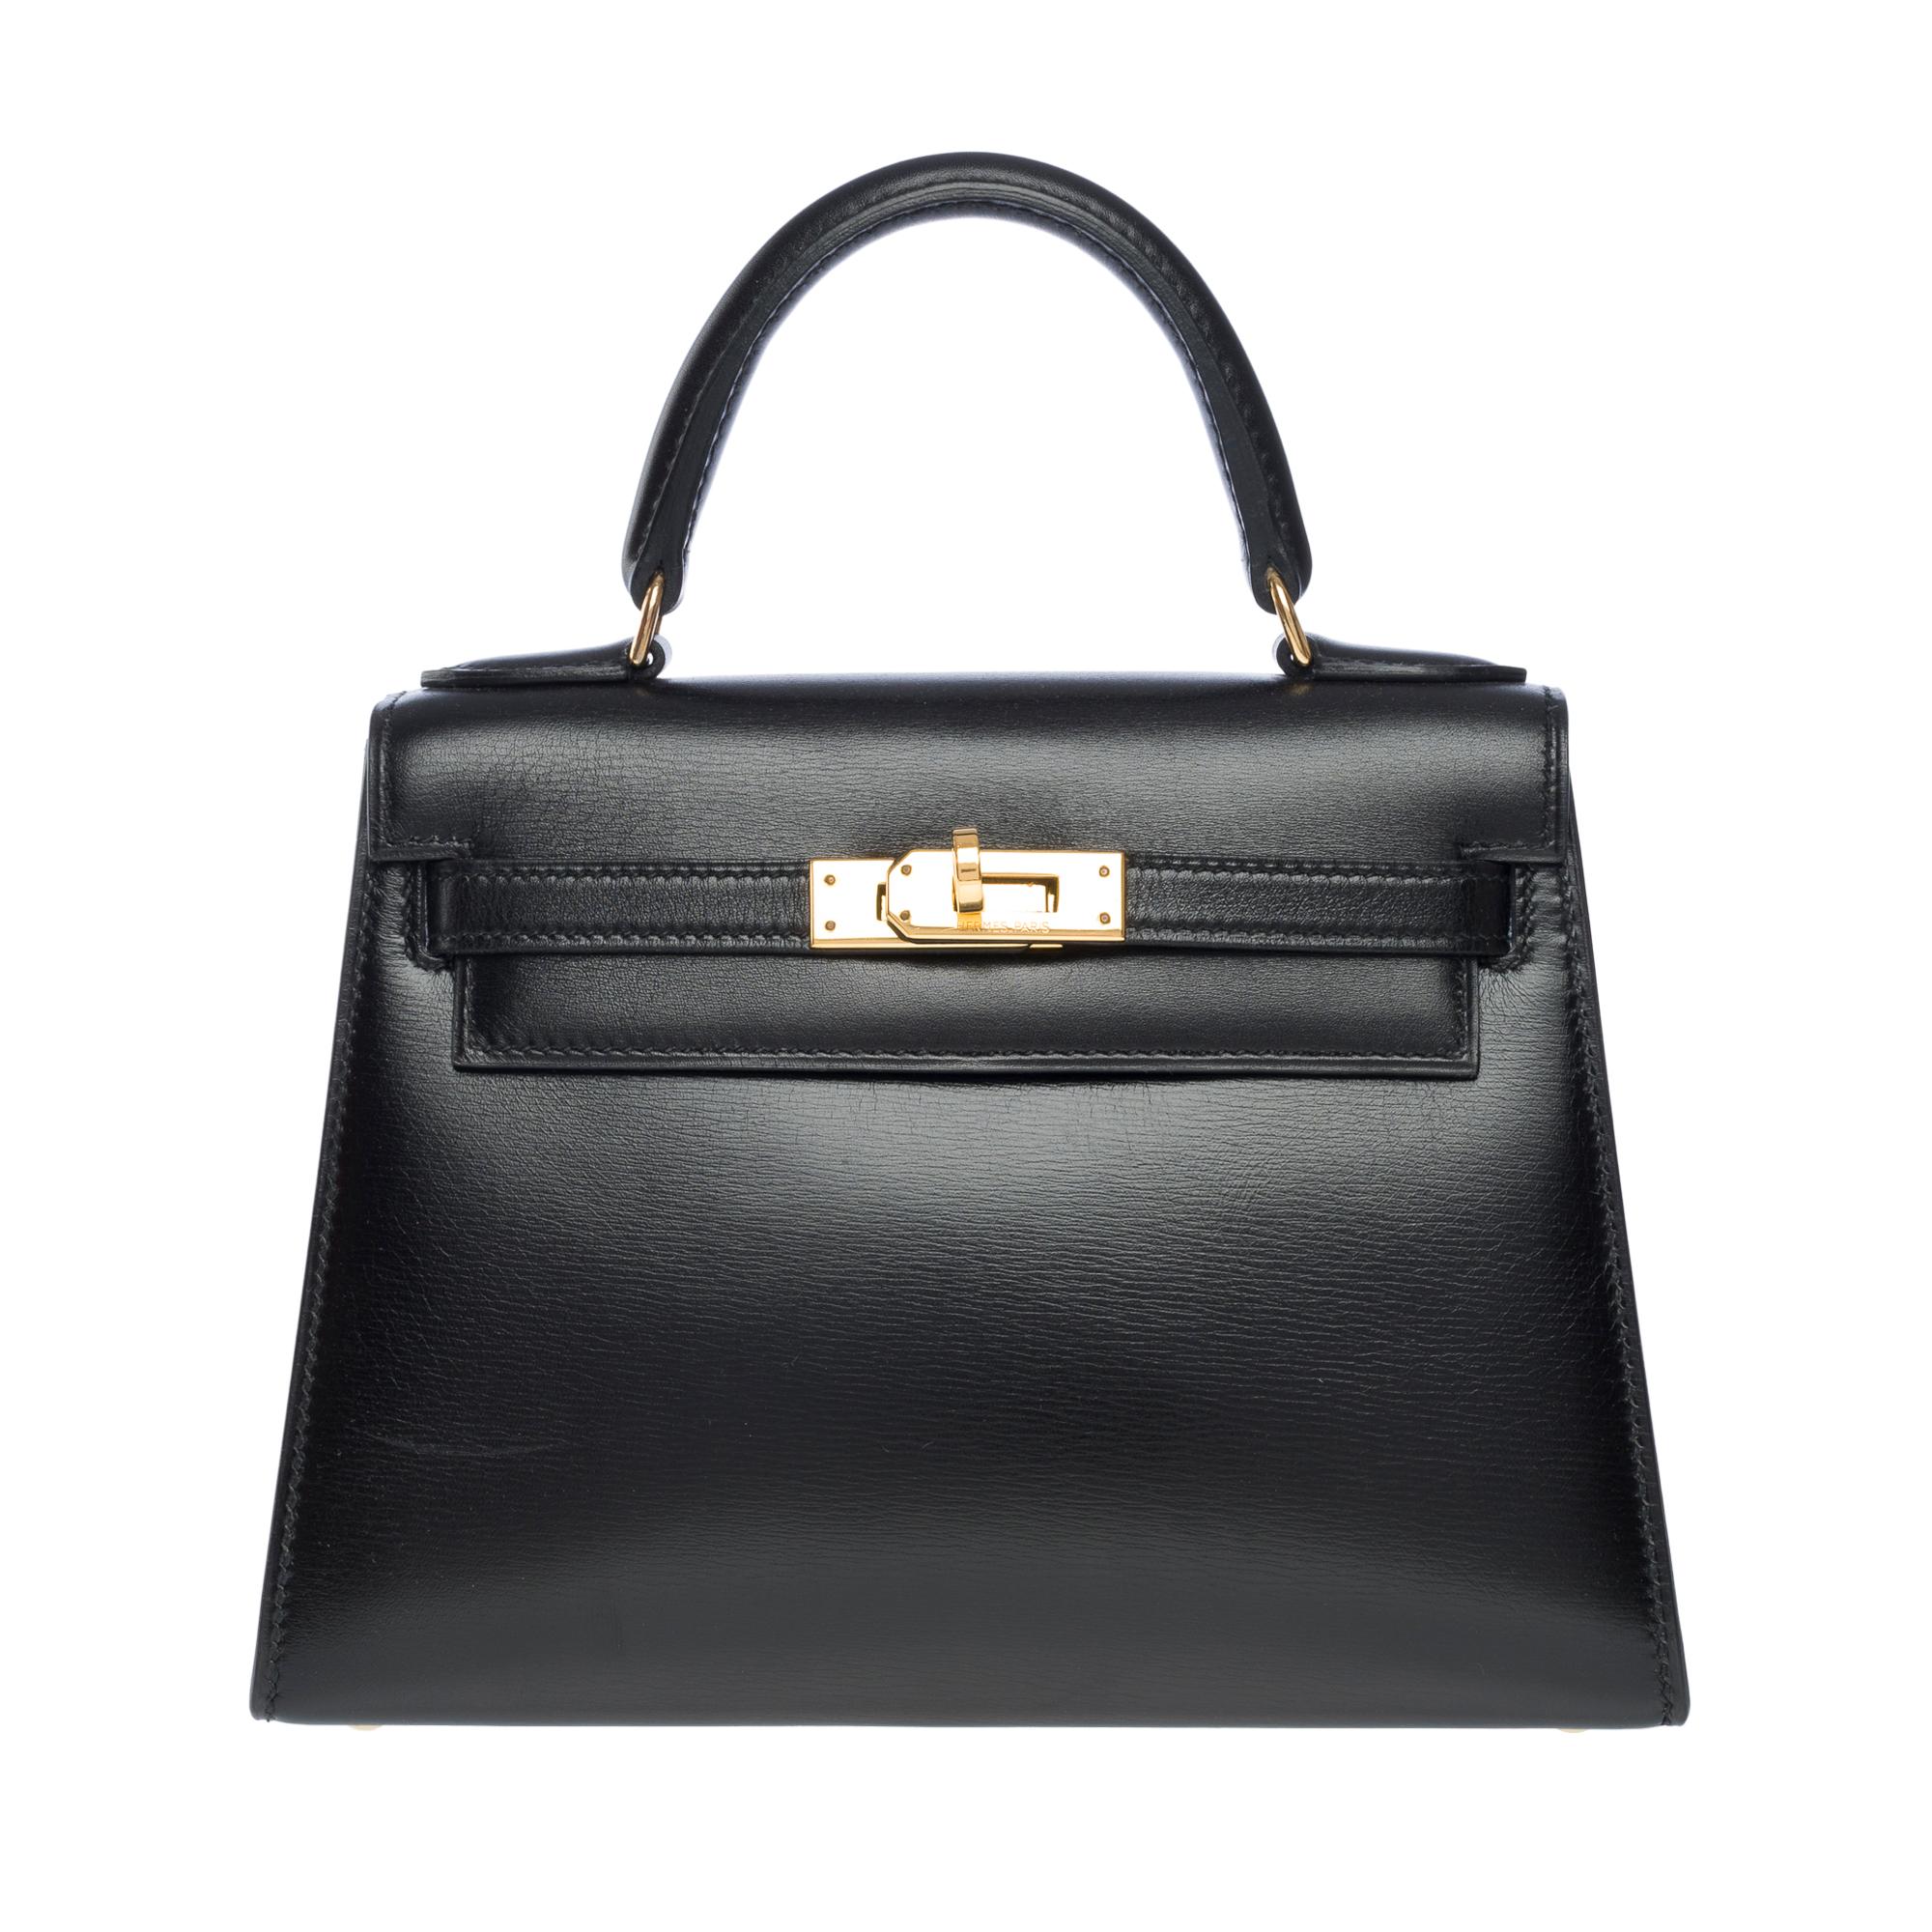 Rare & Amazing Hermes Mini Kelly handbag 20 cm double strap in black box calf leather, gold plated metal hardware, handle and 2 removable shoulder straps (one short and one long, not signed Hermès) in black leather box for a hand, shoulder or